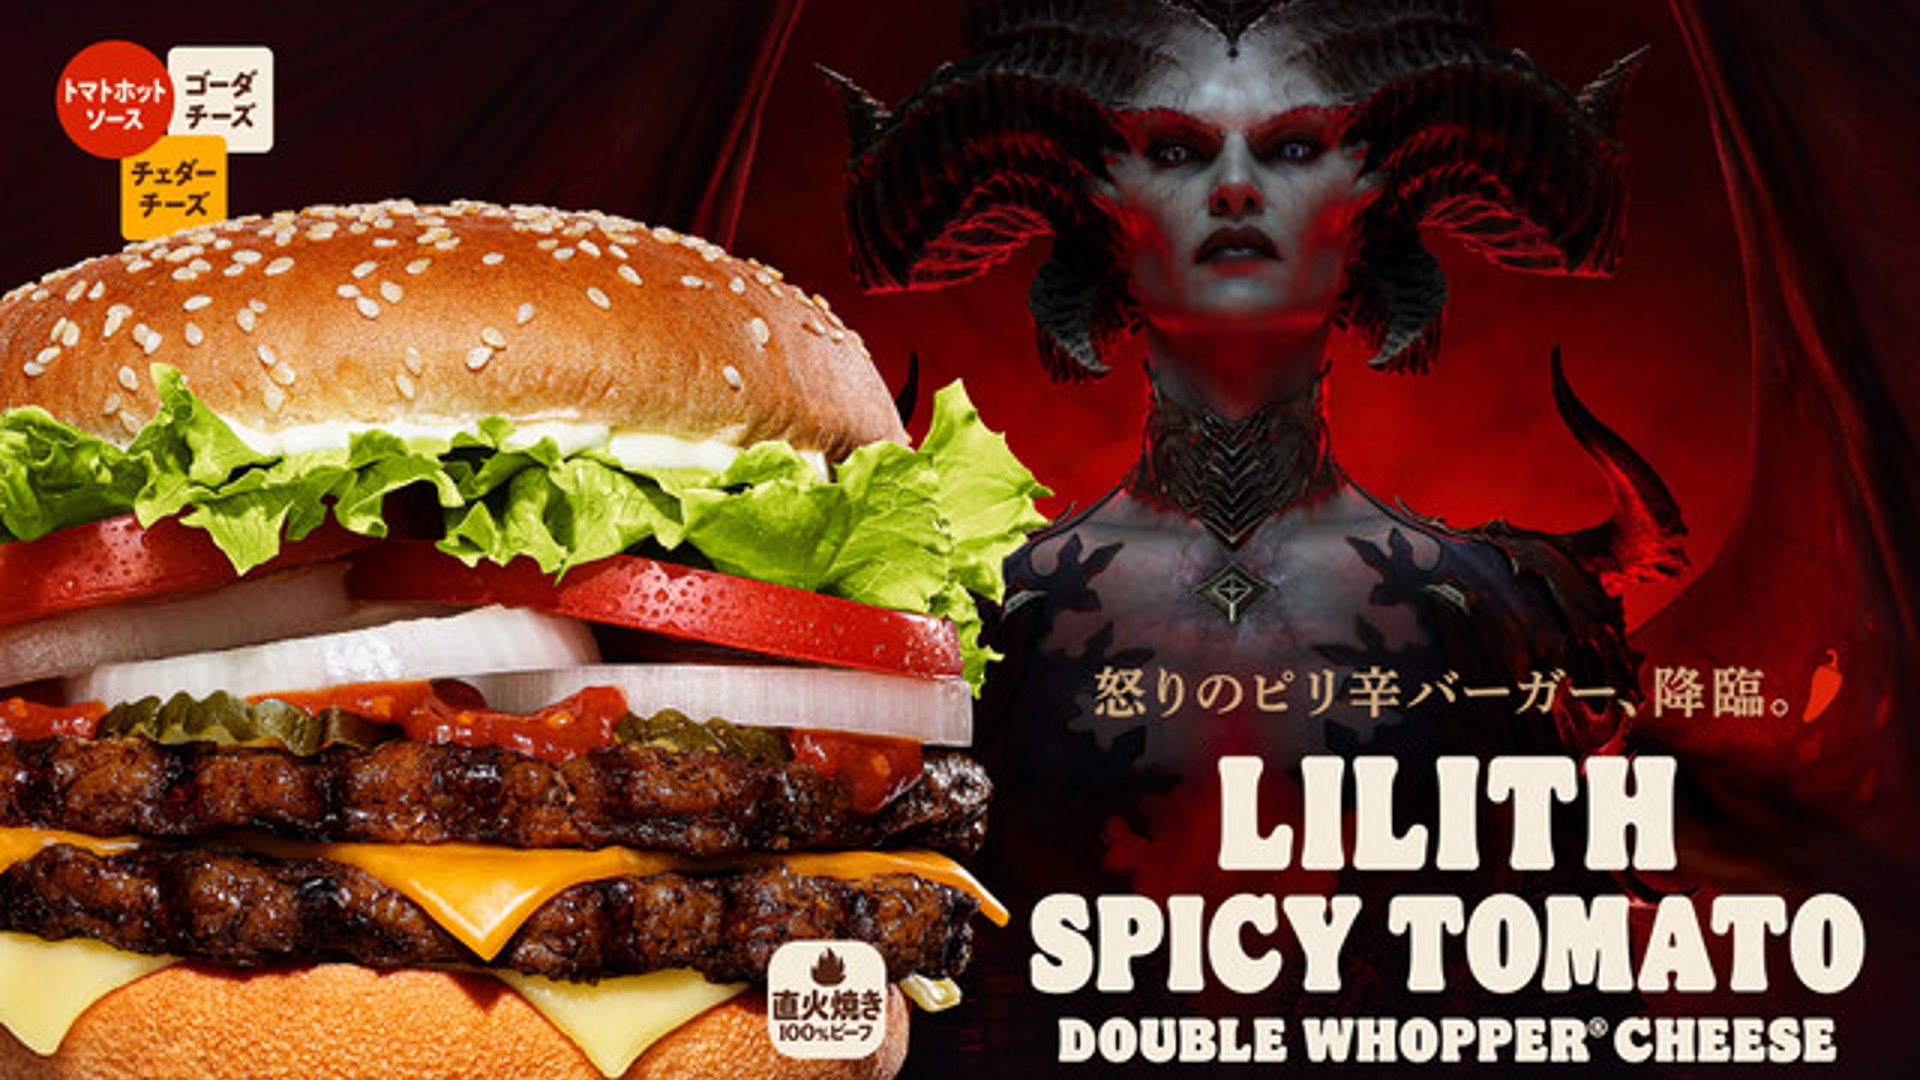 The Lilith Spicy Tomato Burger is part of the new Diablo 4 themed ad campaign